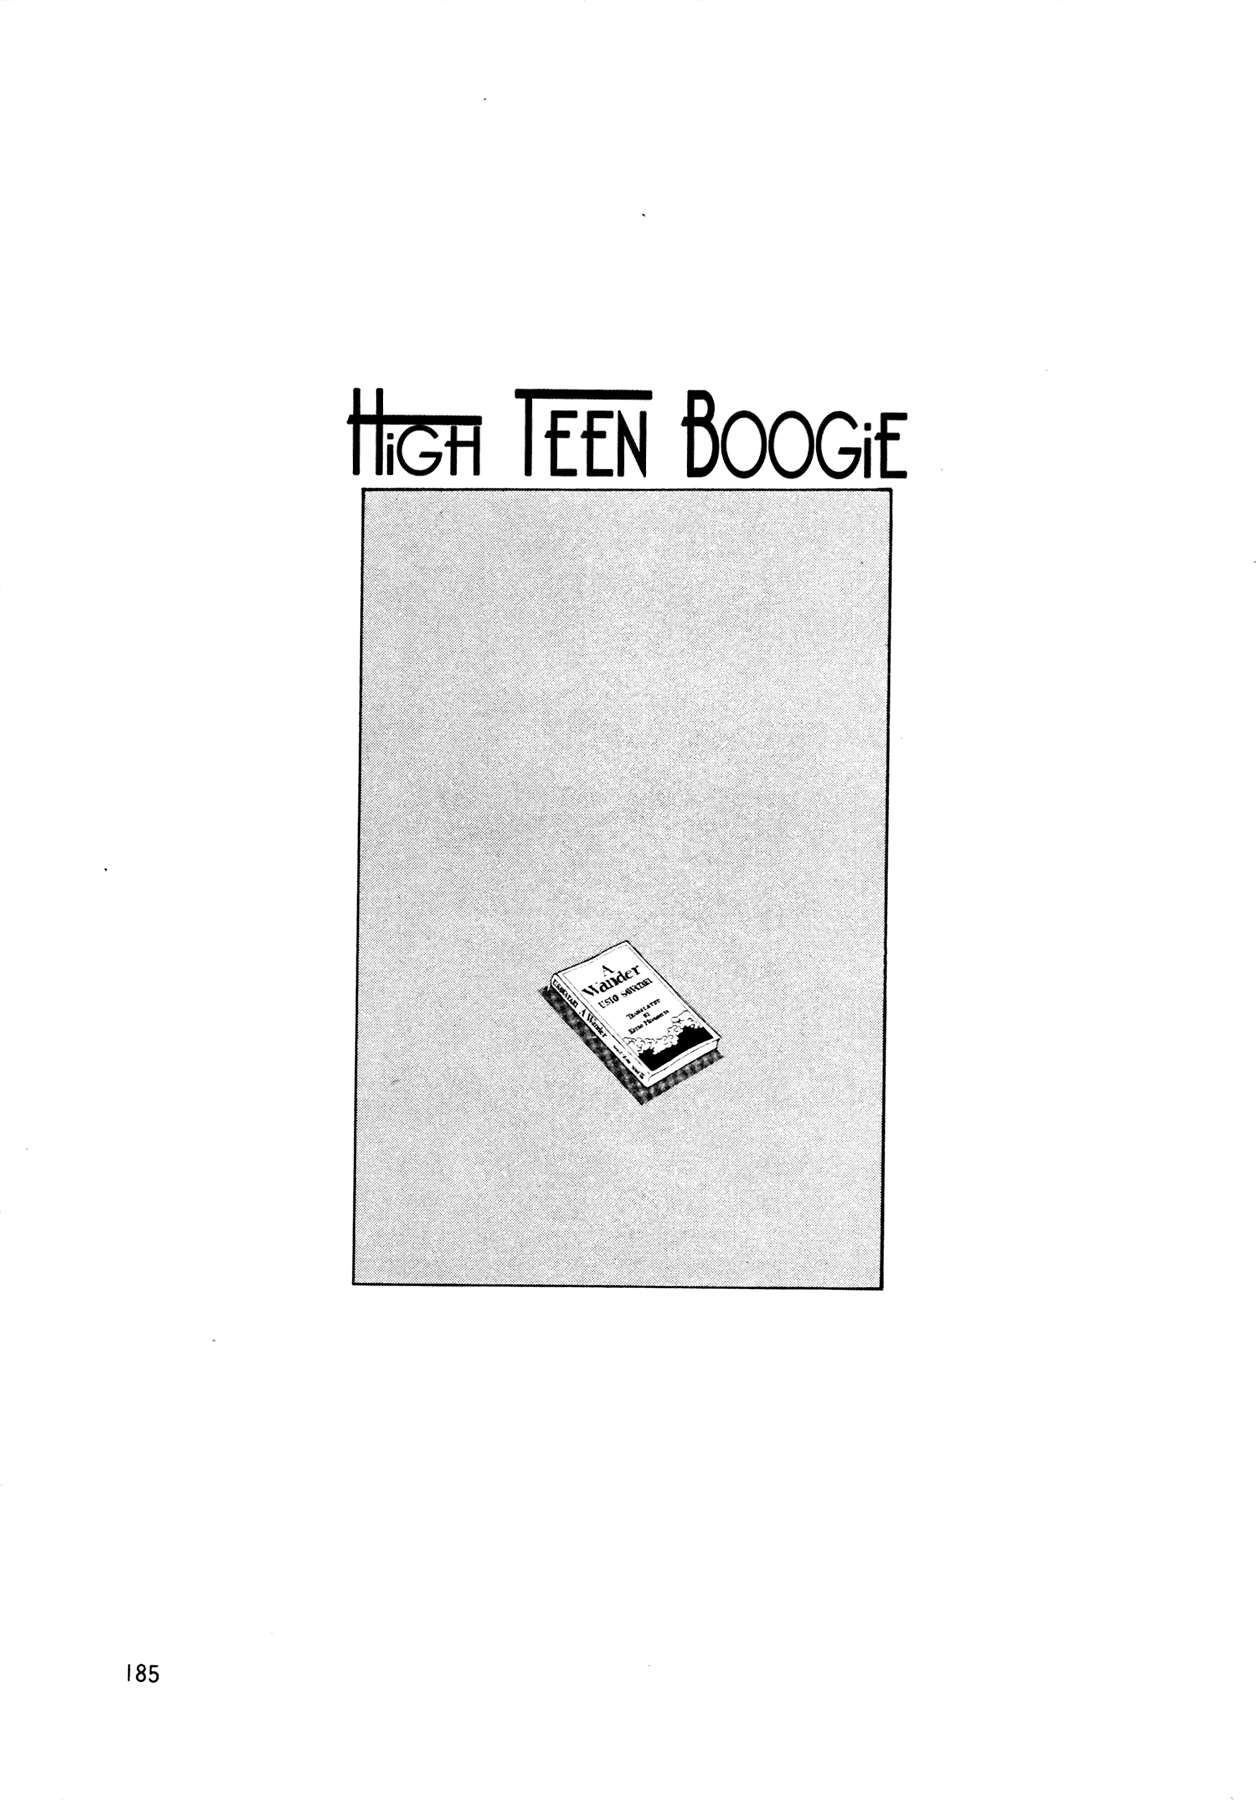 High Teen Boogie - Page 2